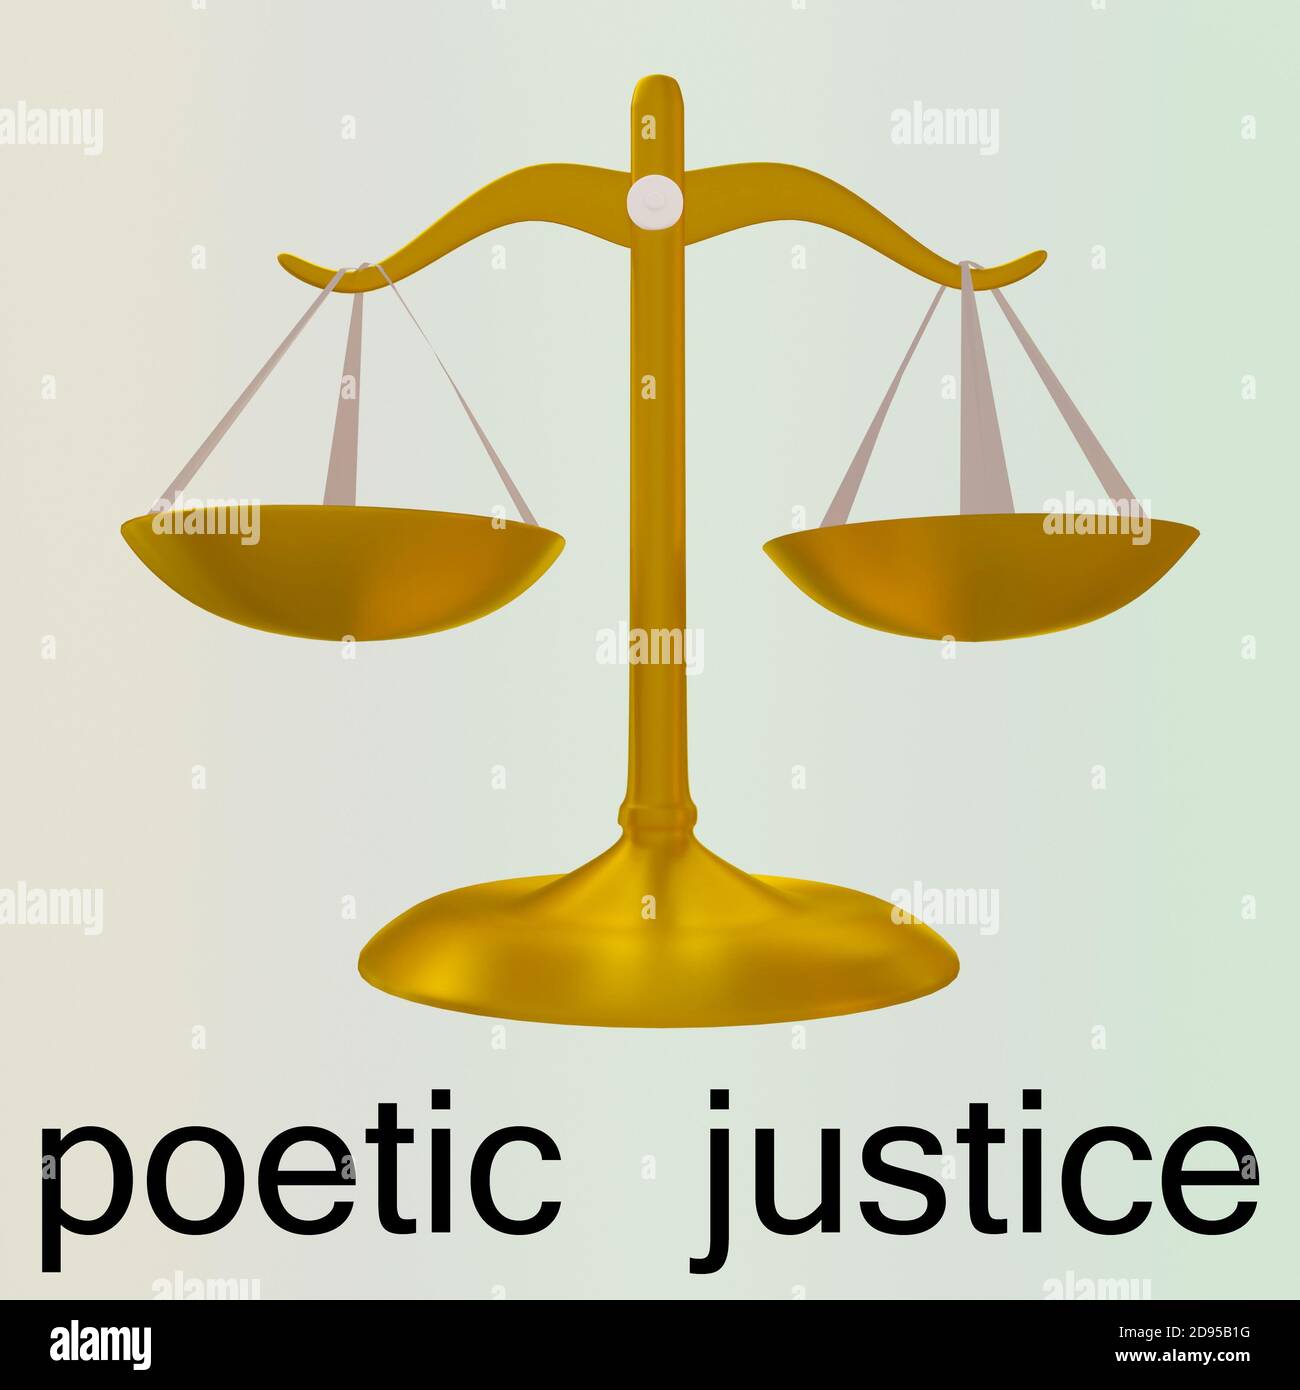 3D illustration of scales  and the words poetic justice at the bottom, isolated over pale colored background. Stock Photo